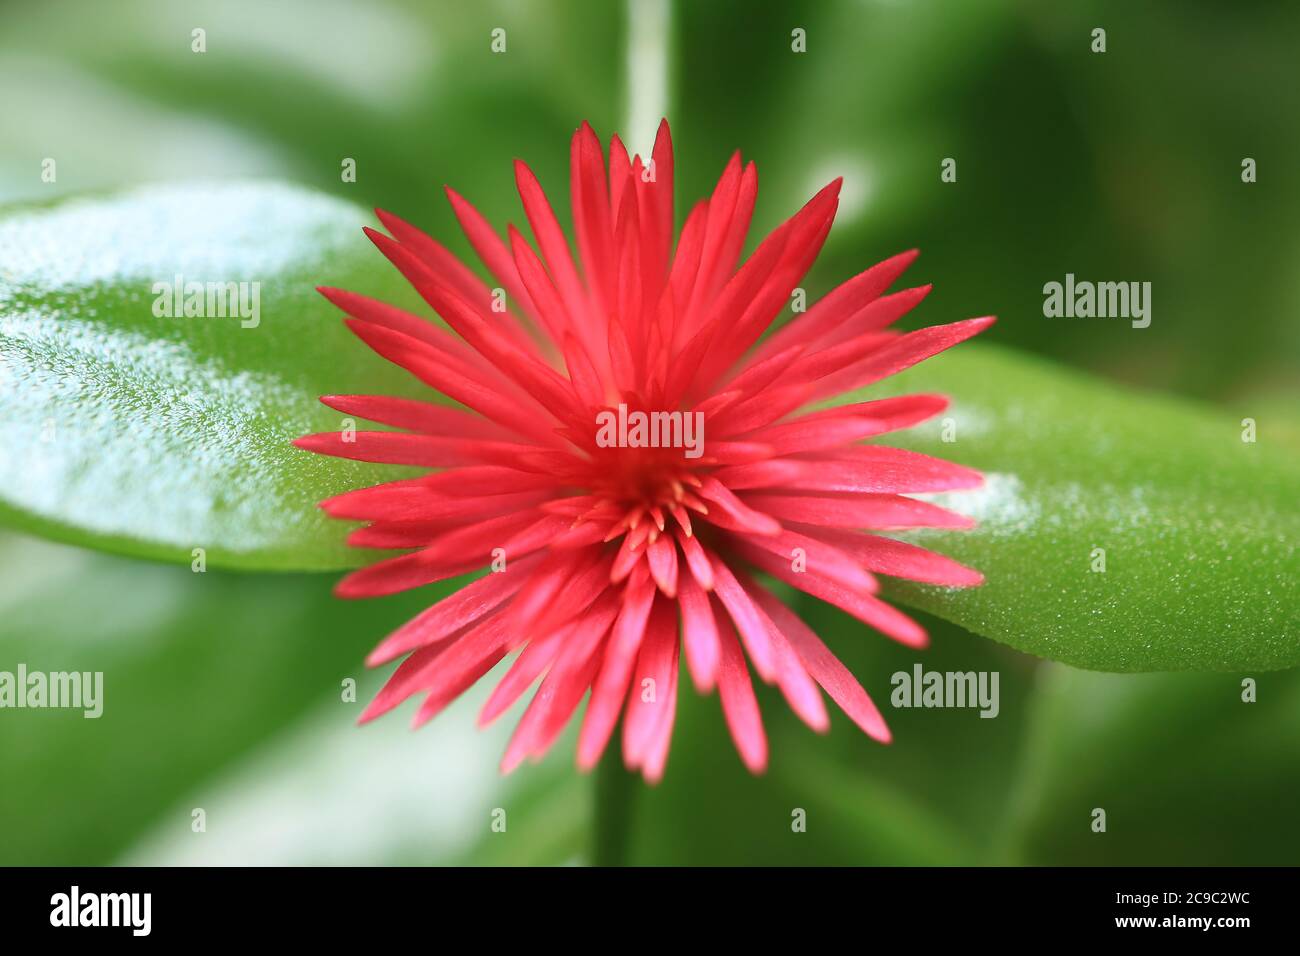 Top View of a Blooming Vibrant Pink Baby Sun Rose Flower on Bright Green Leaves Stock Photo